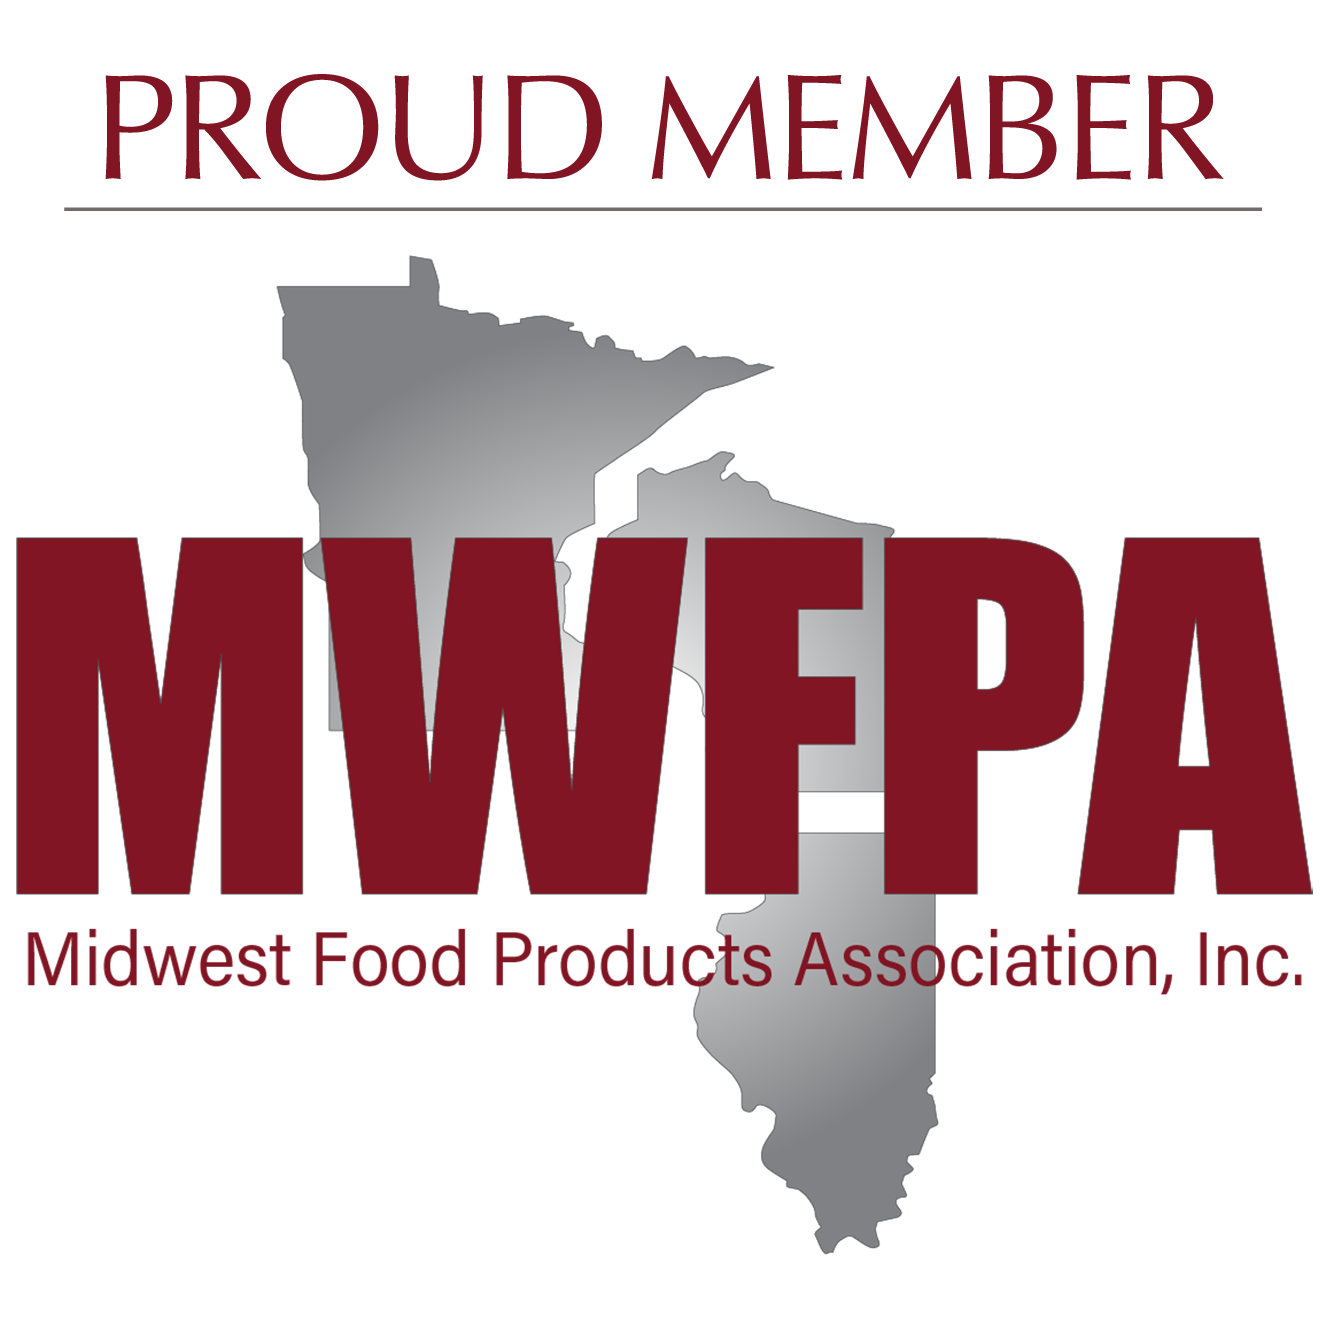 Midwest Food Processing Association